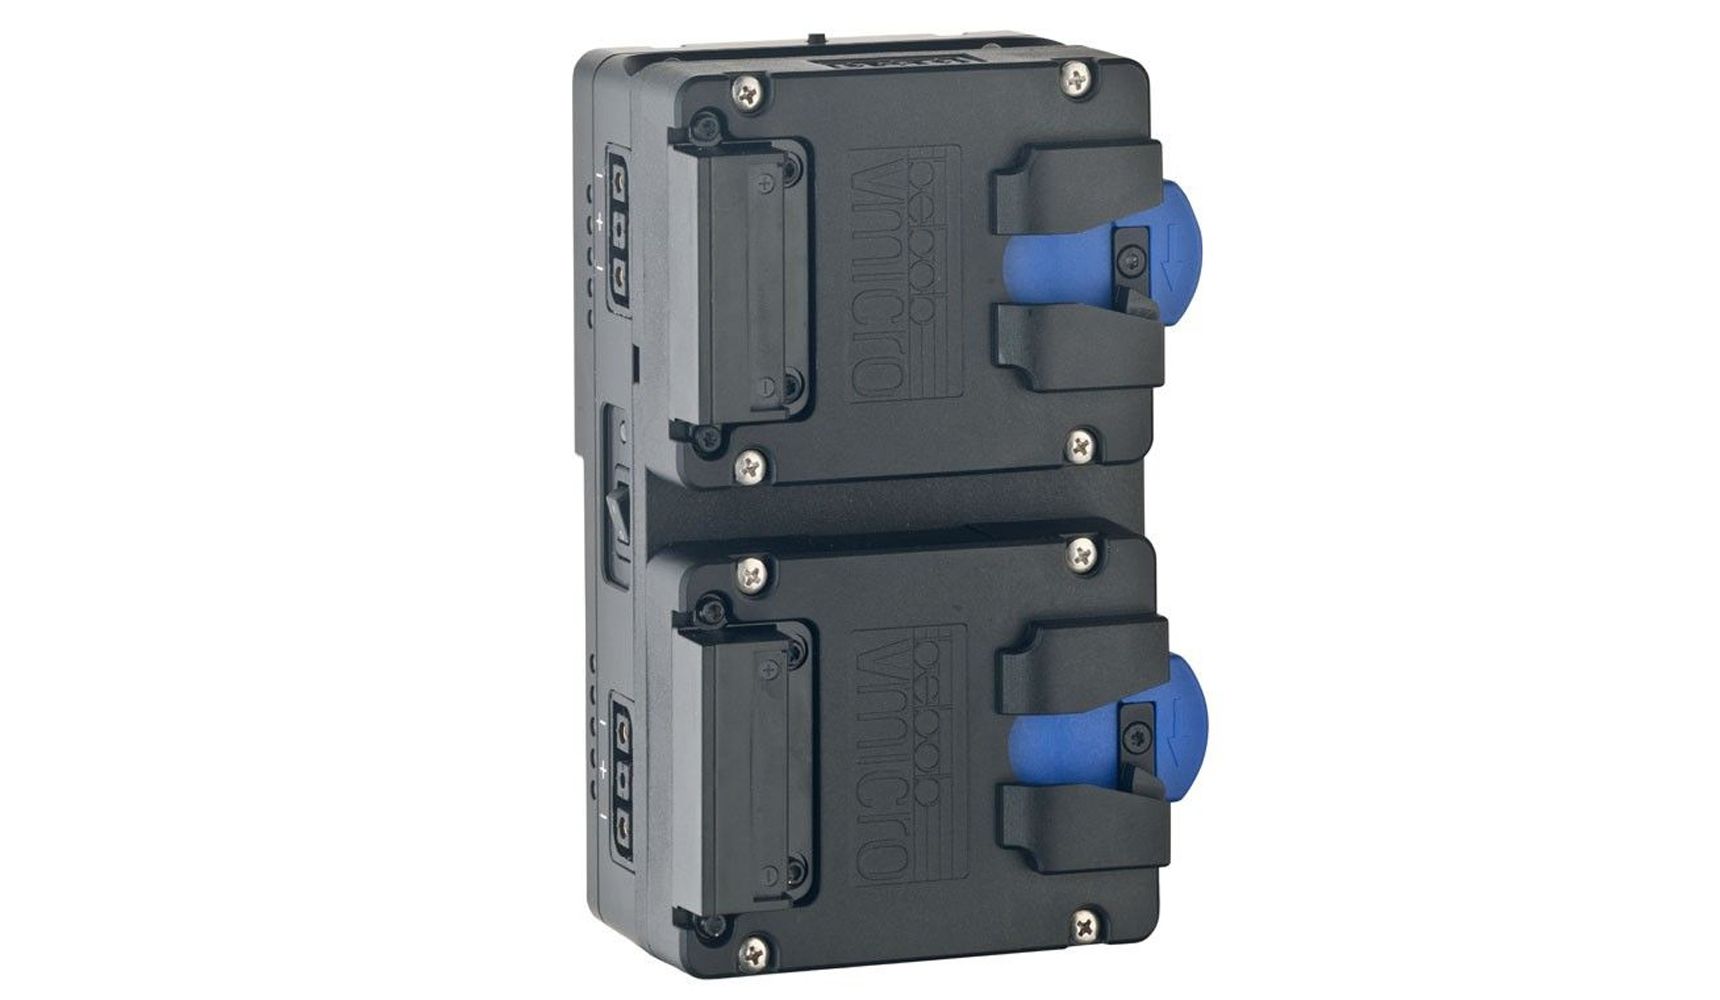 BEBOB - COCO-VMICRO2 - Double micro V-mount adapter plate with hotswap, charging function and additional outputs